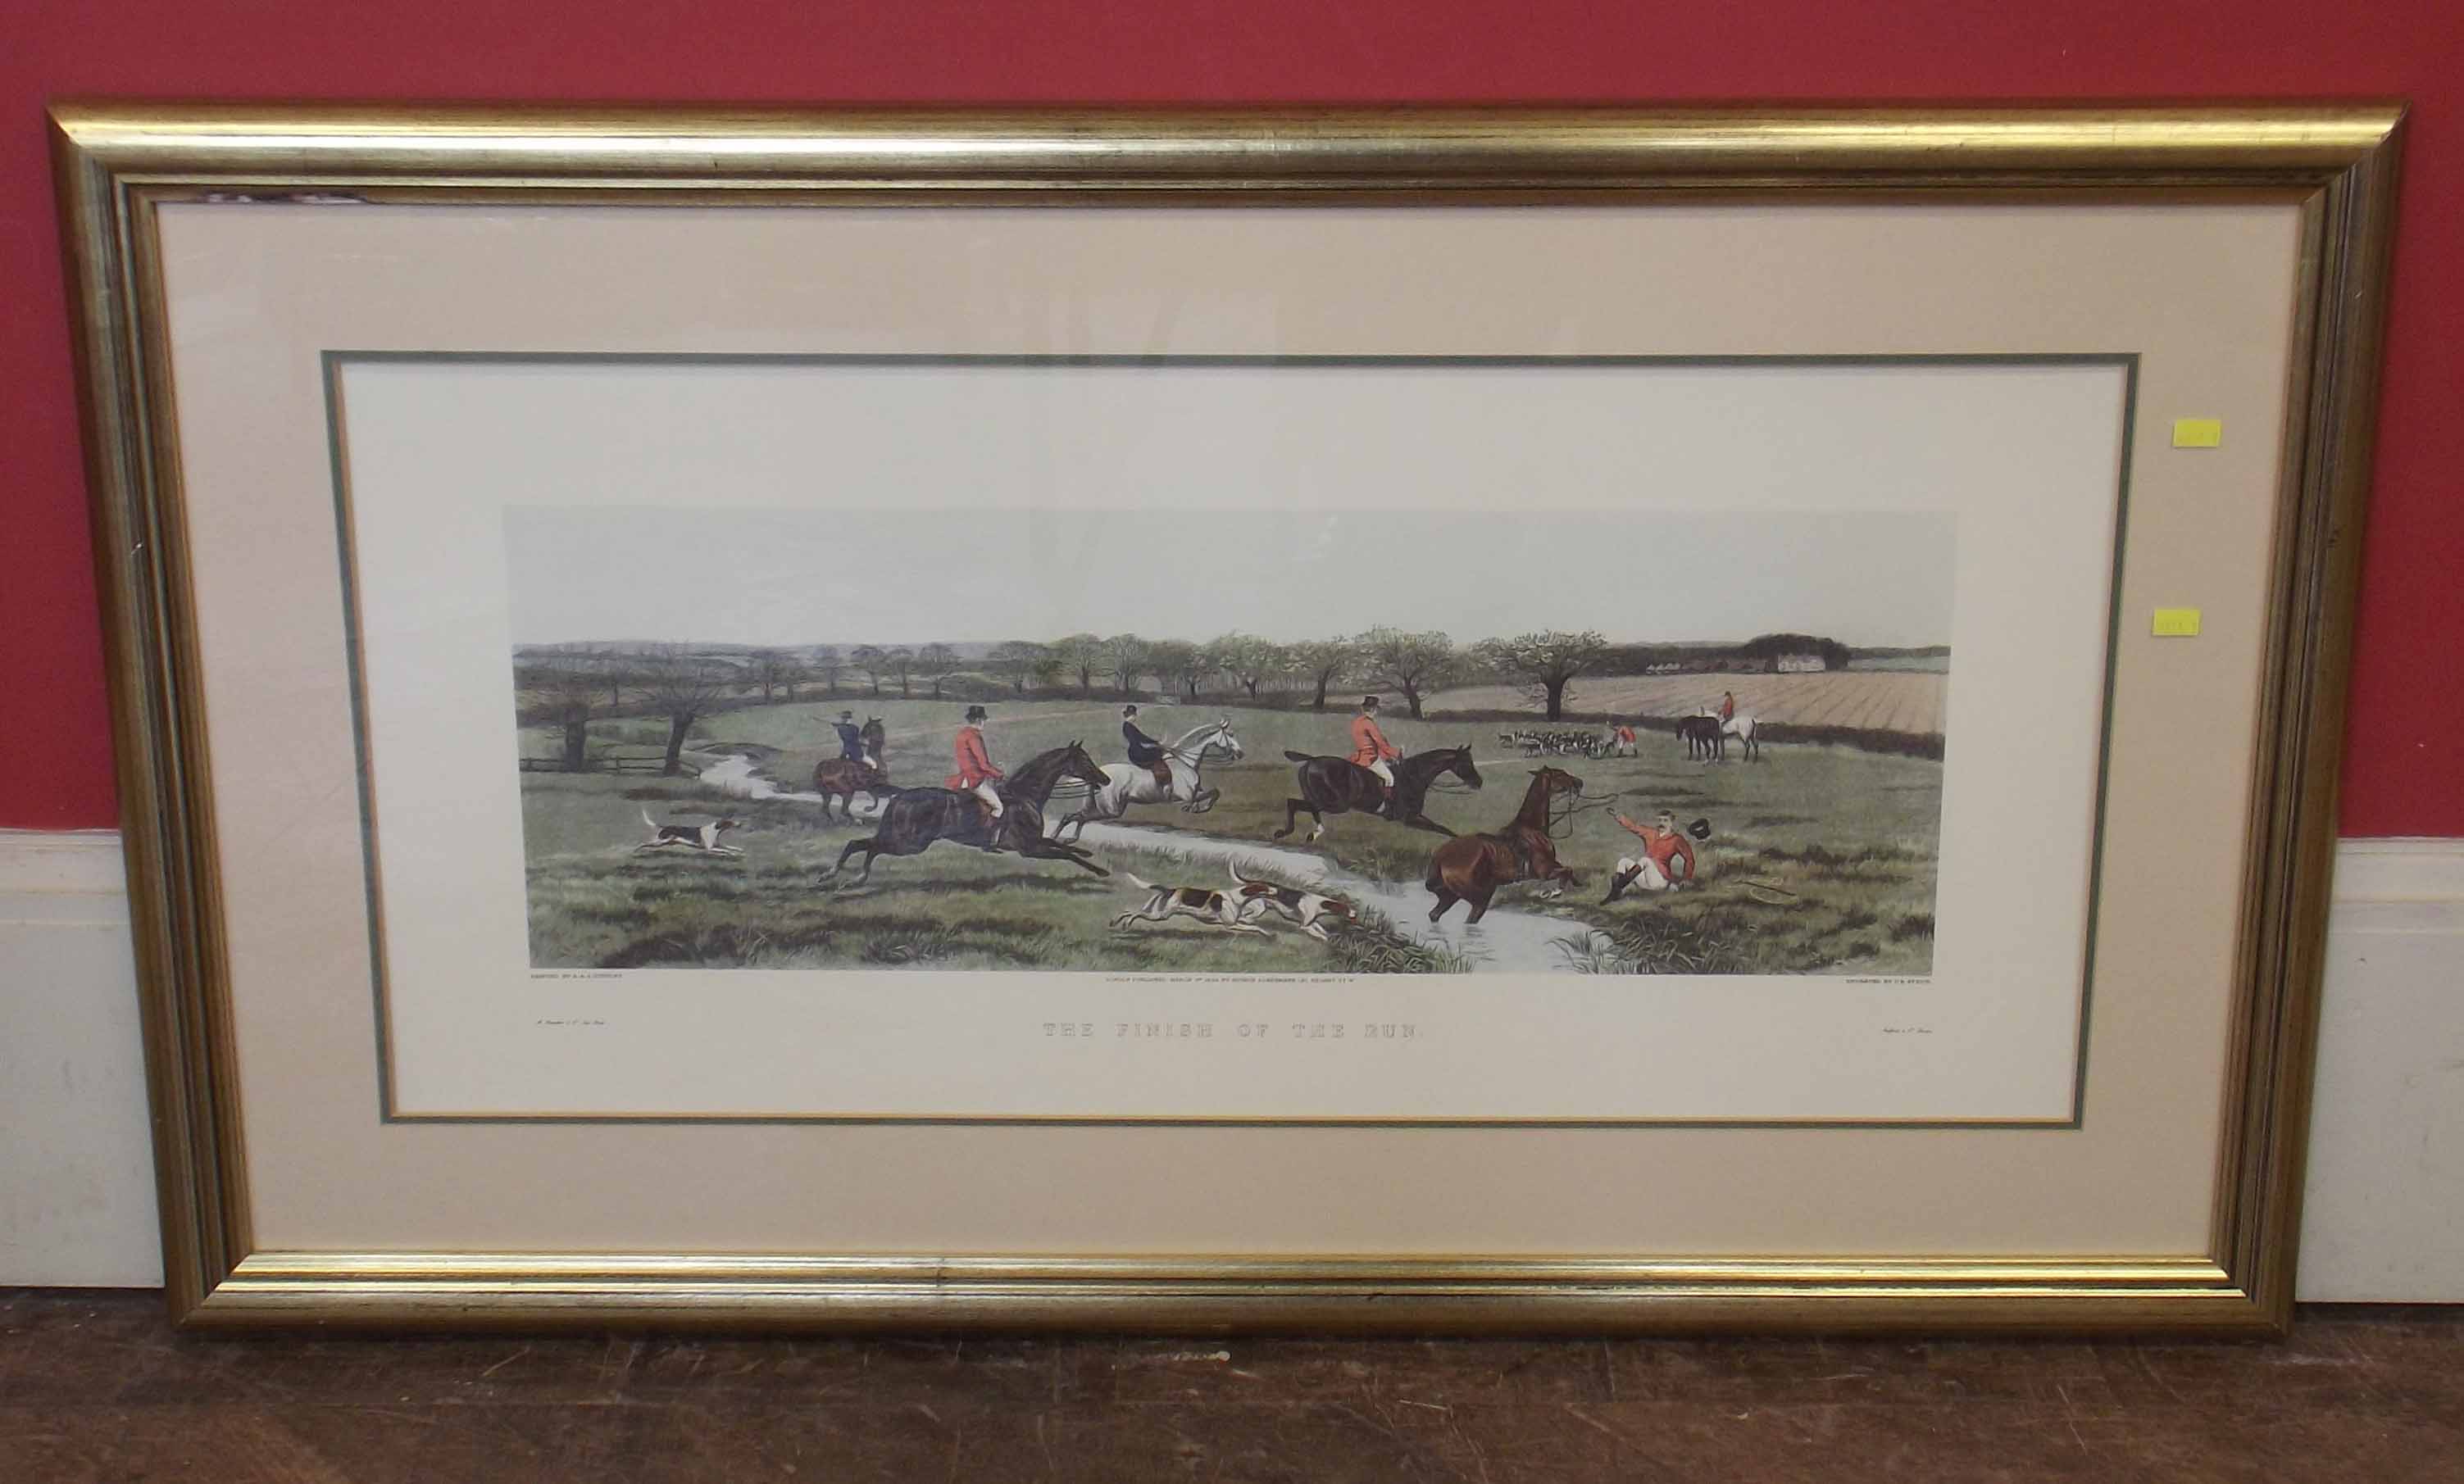 After Douglas - "The Finish of the Run", framed print. Condition report: see terms and conditions